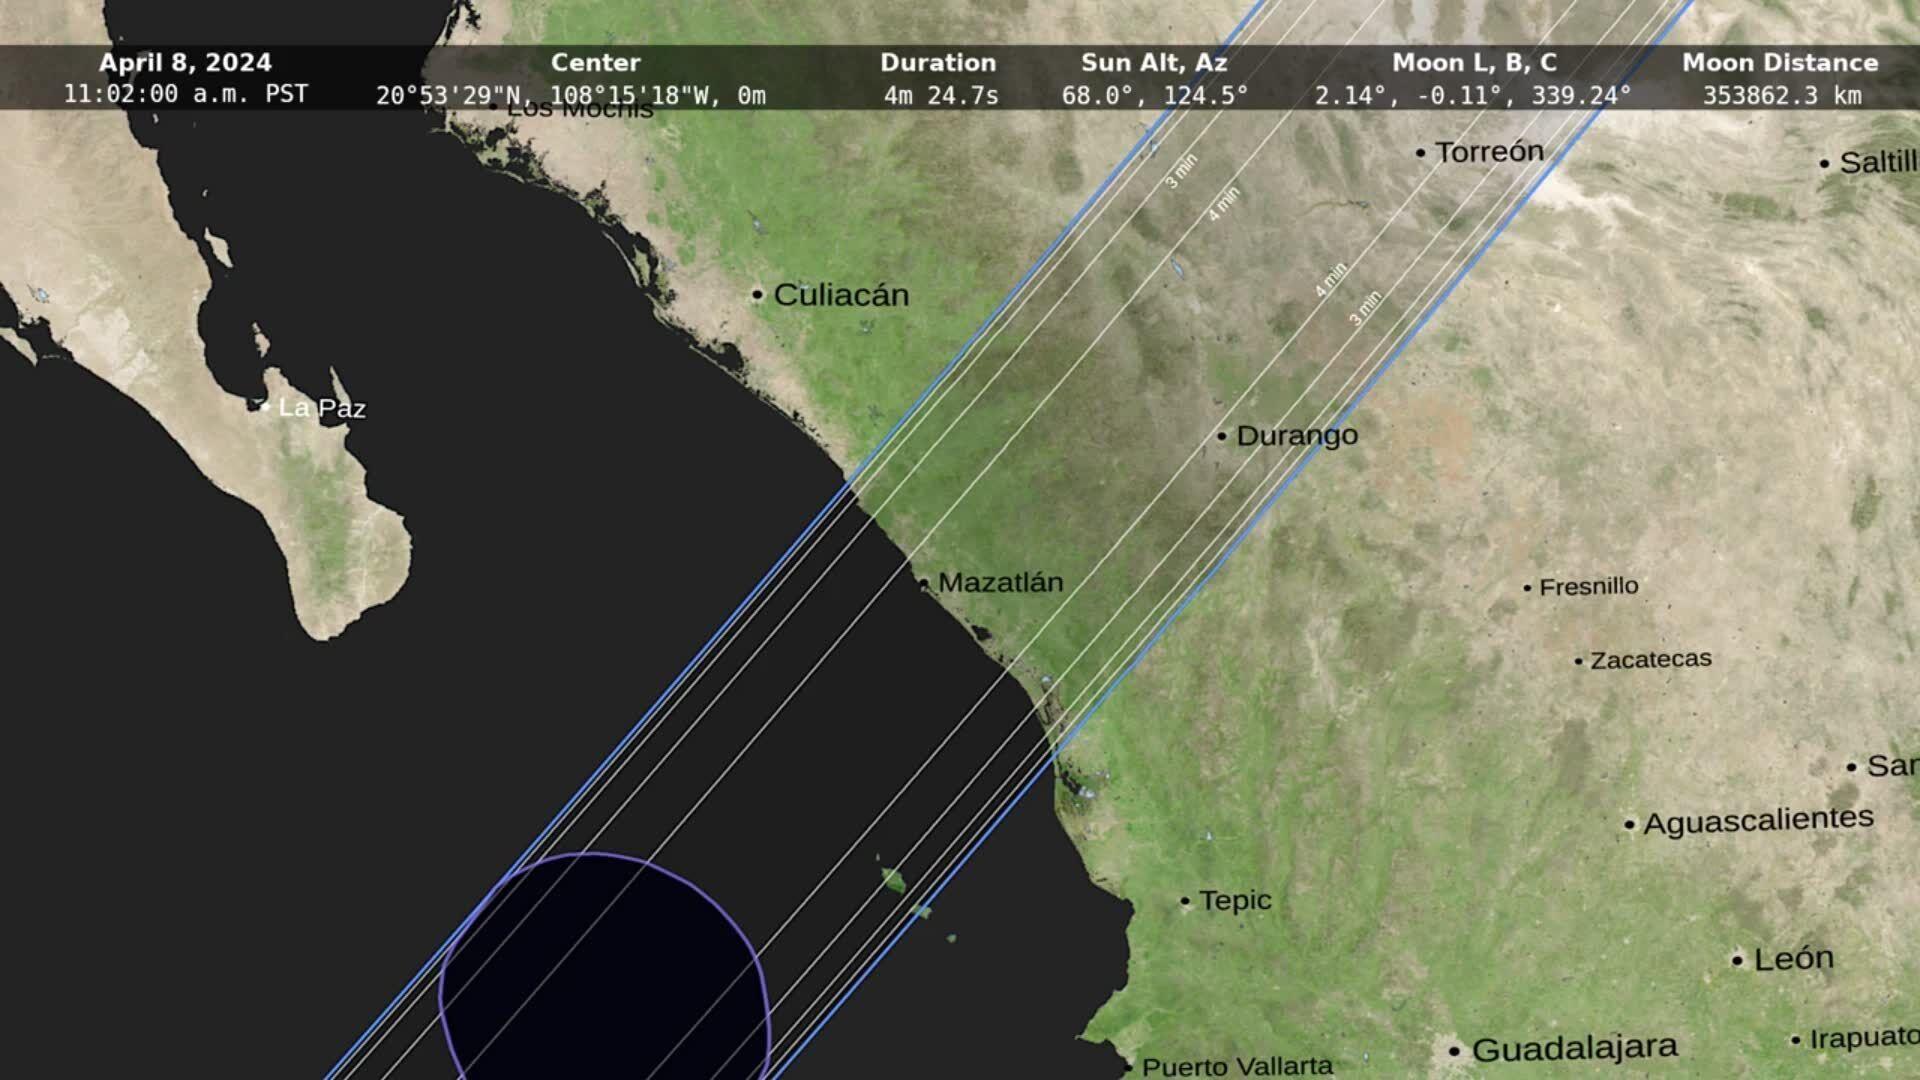 Live in Madison? You can still see a partial solar eclipse